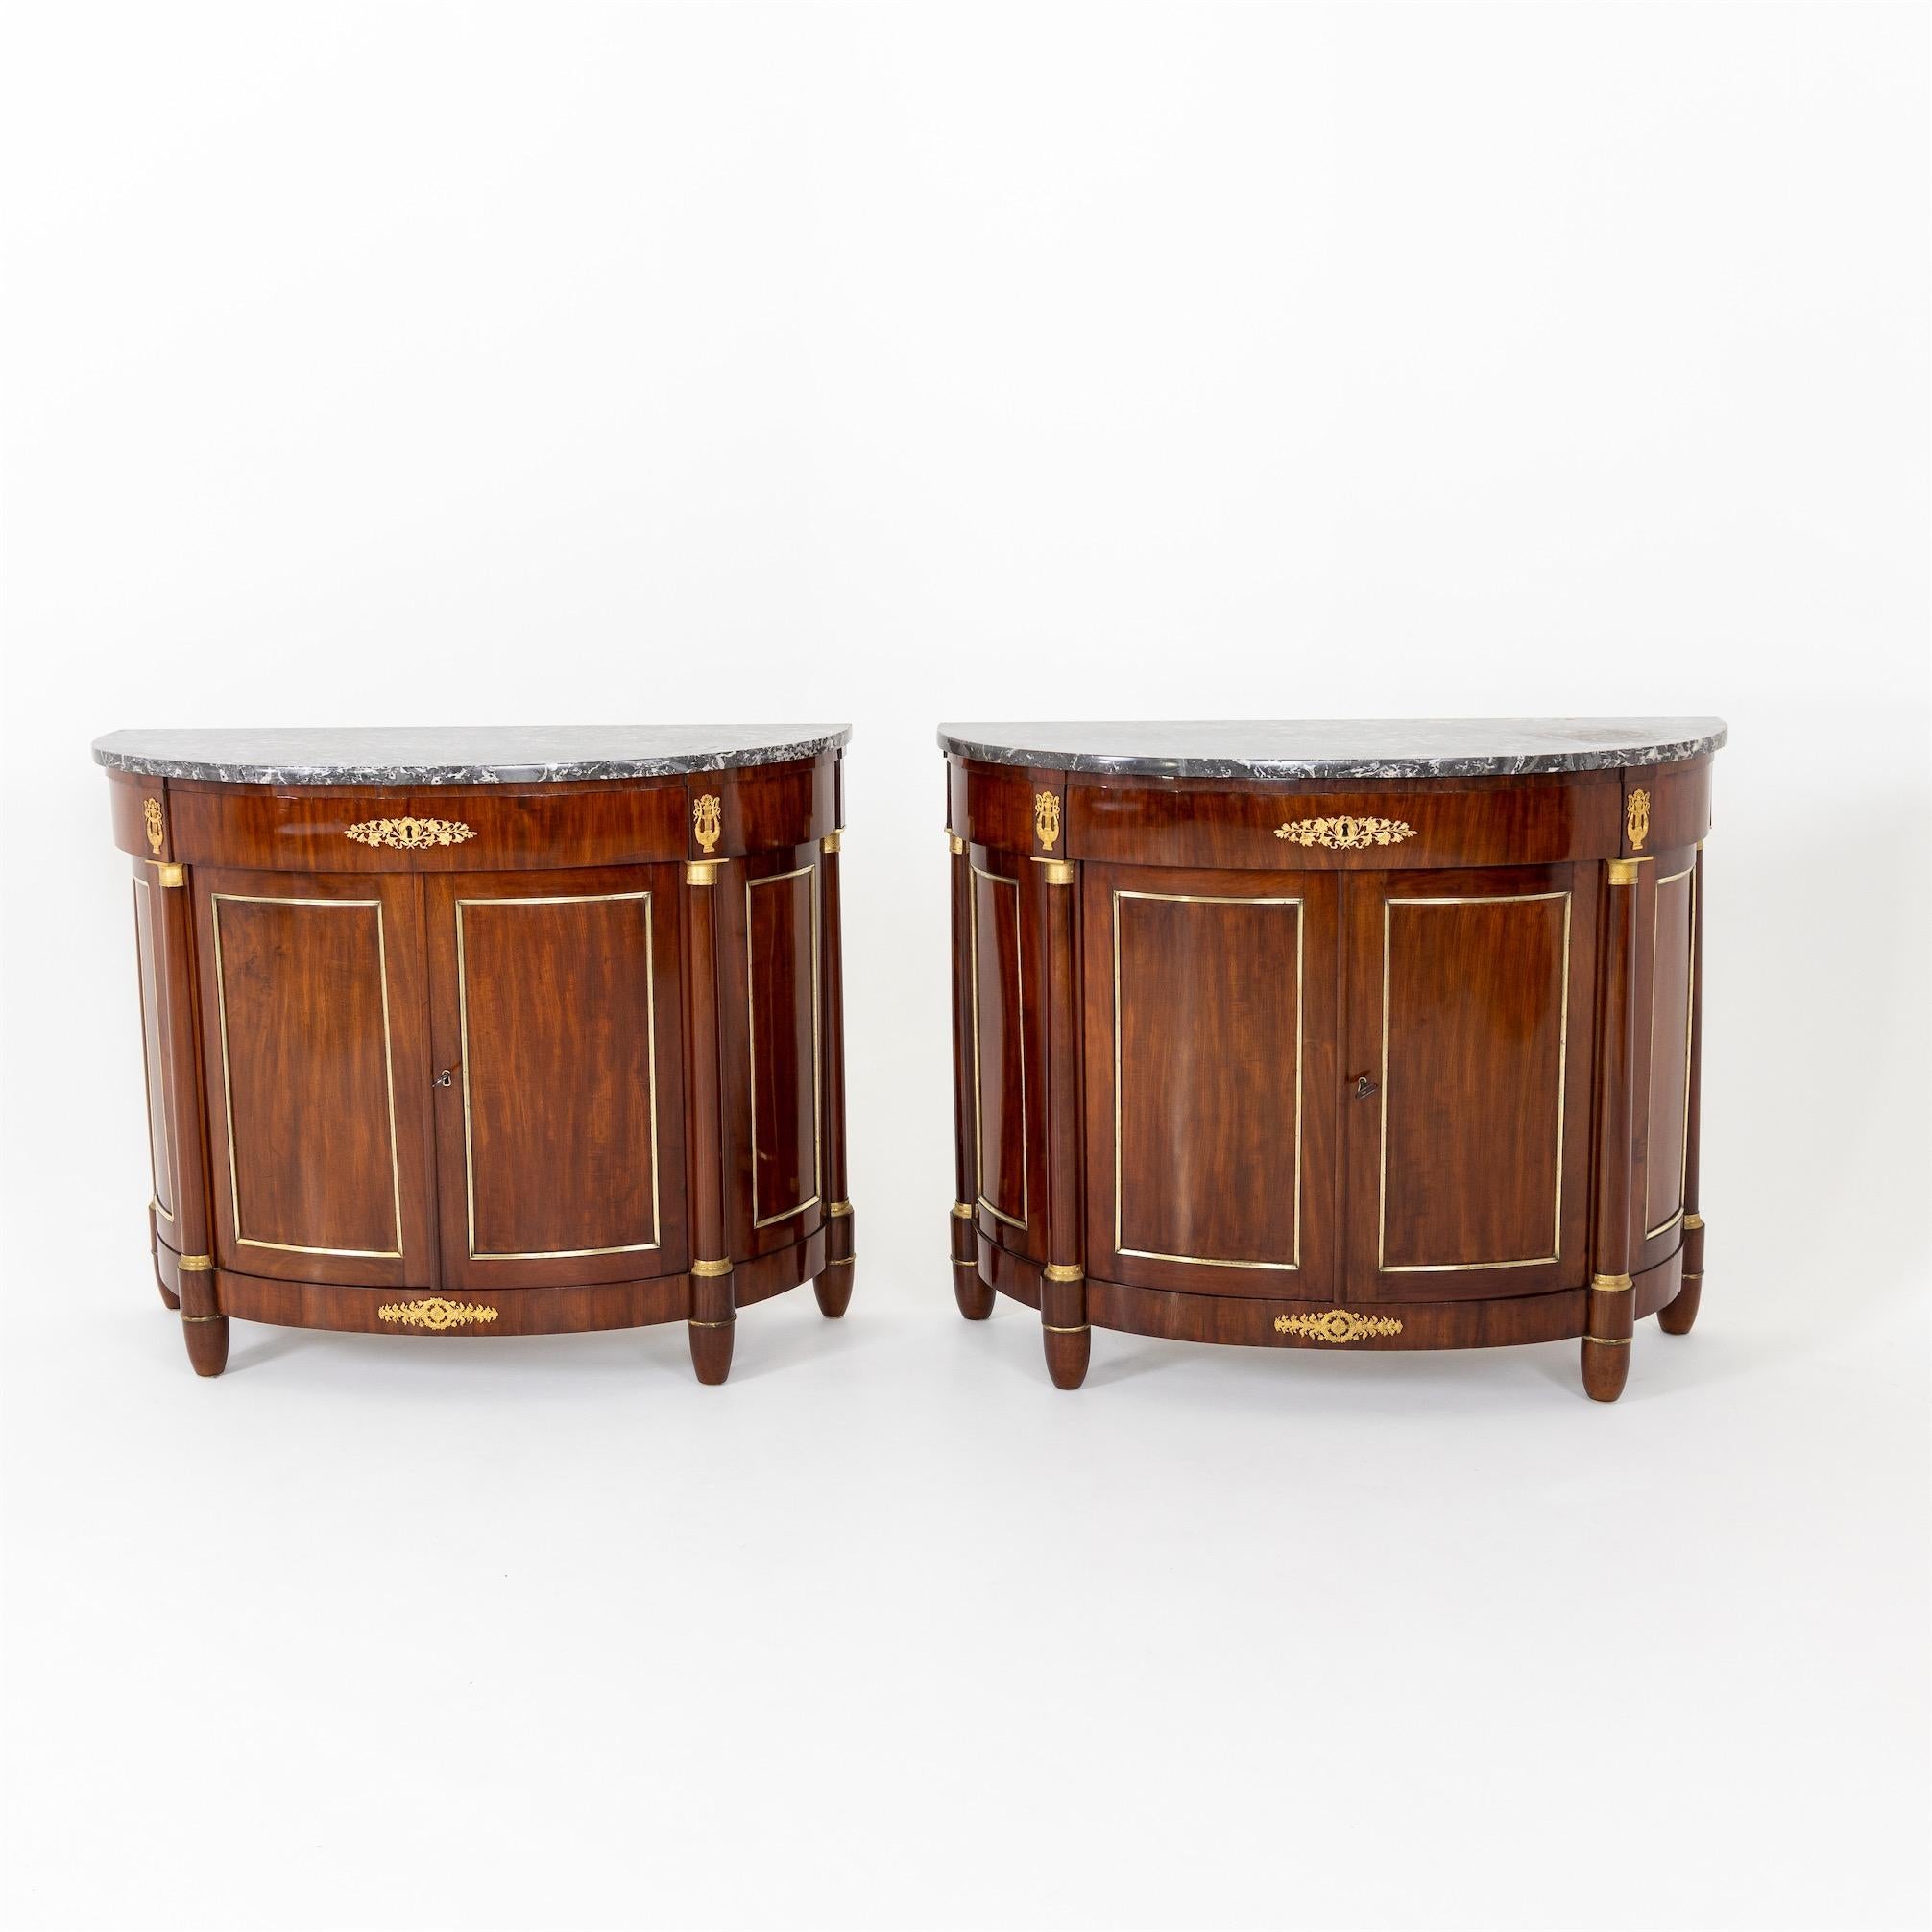 Mahogany Empire Demi Lune Sideboards, France, c. 1810